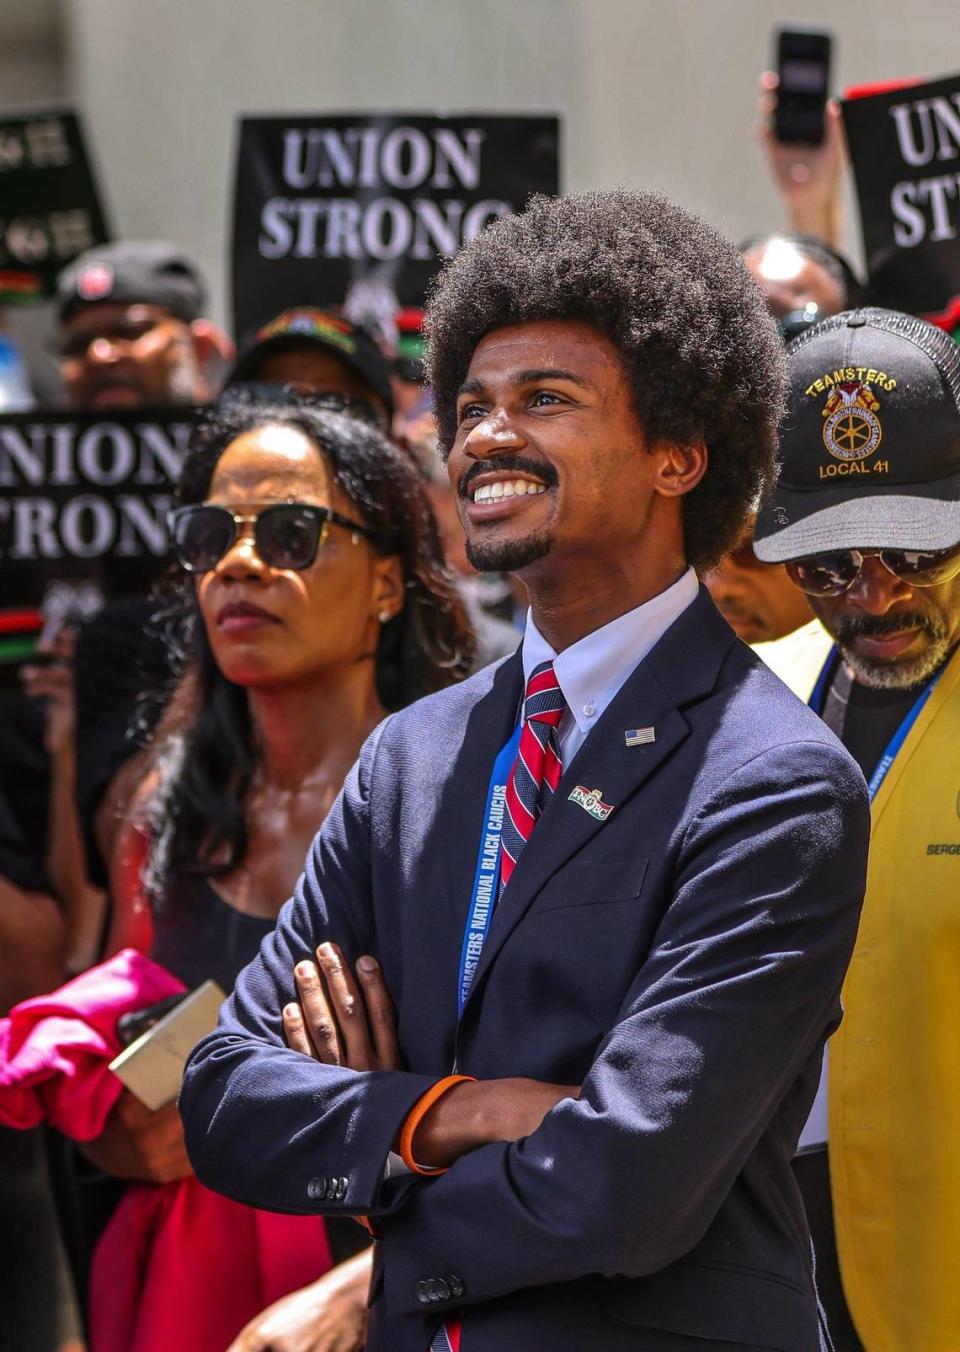 Tennessee Democrat State Rep. Justin Pearson, center, smiles as he awaits to take the stage during the demonstration outside the Miami-Dade County School Board administration building at a protest of the new African American history standards approved by the state in July, Wednesday, Aug. 16, 2023 in Miami, Florida. On the right is Marvin Dunn.